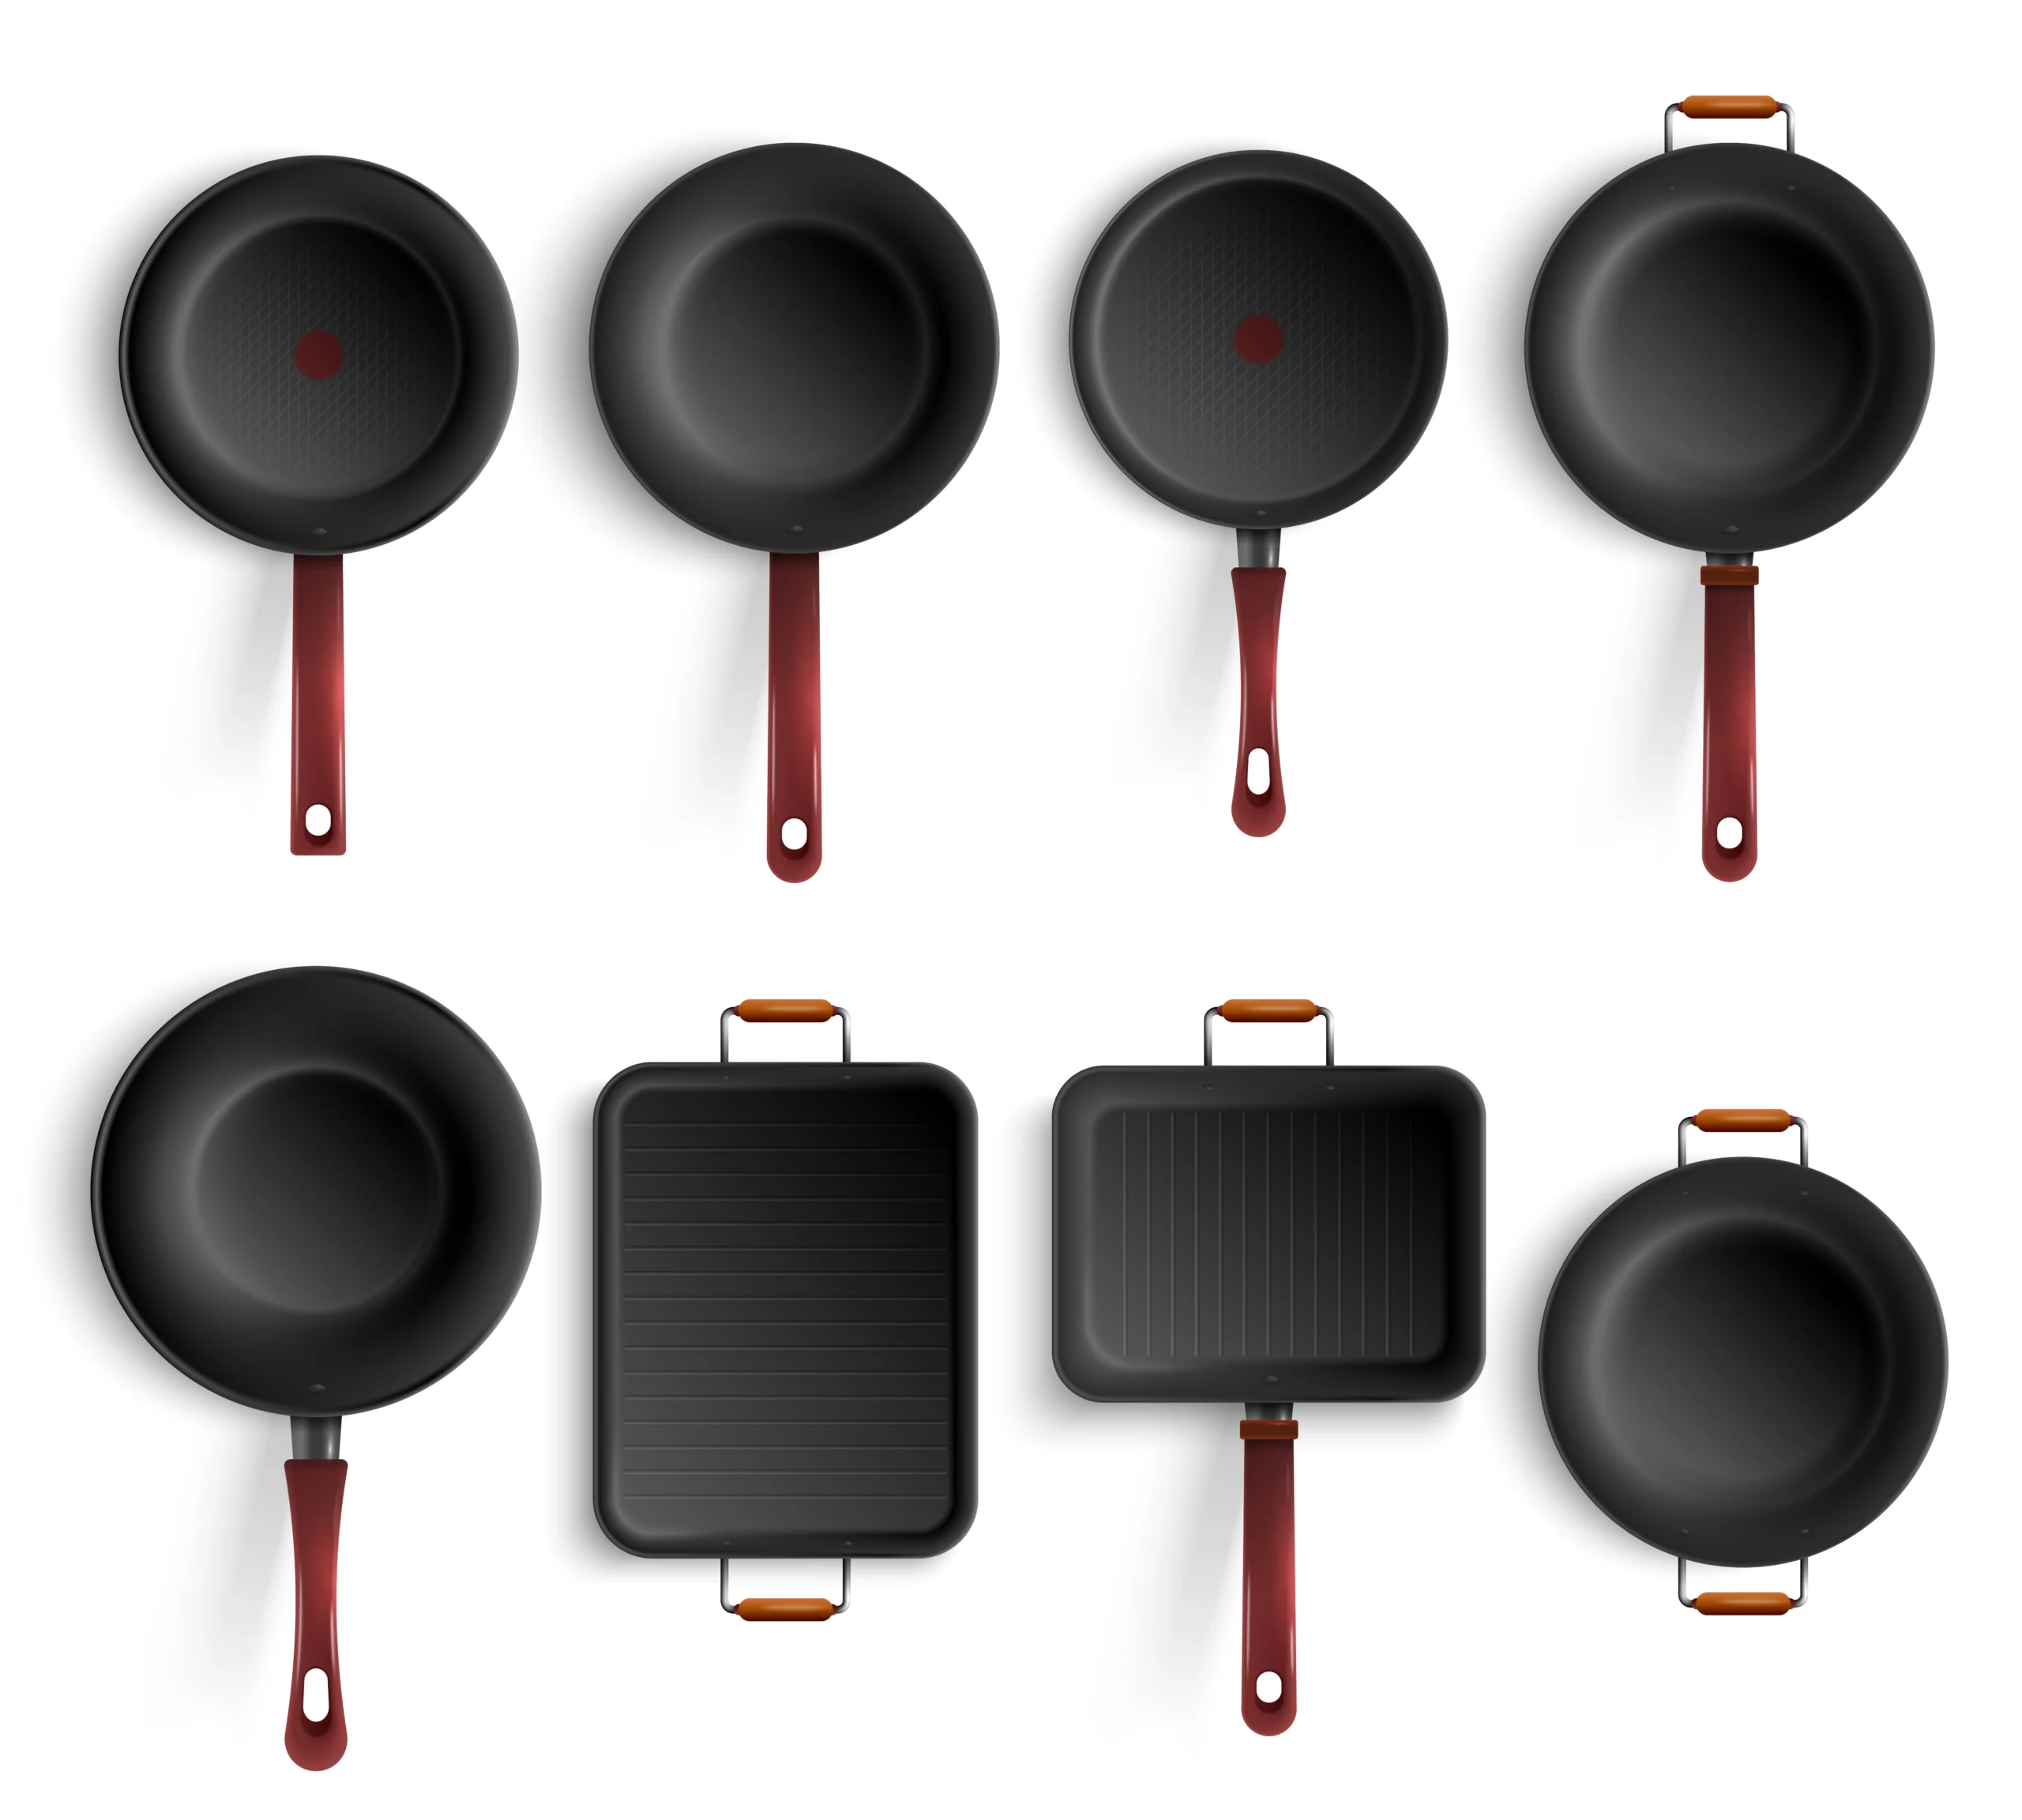 Best Non Stick Fry Pan Set in India